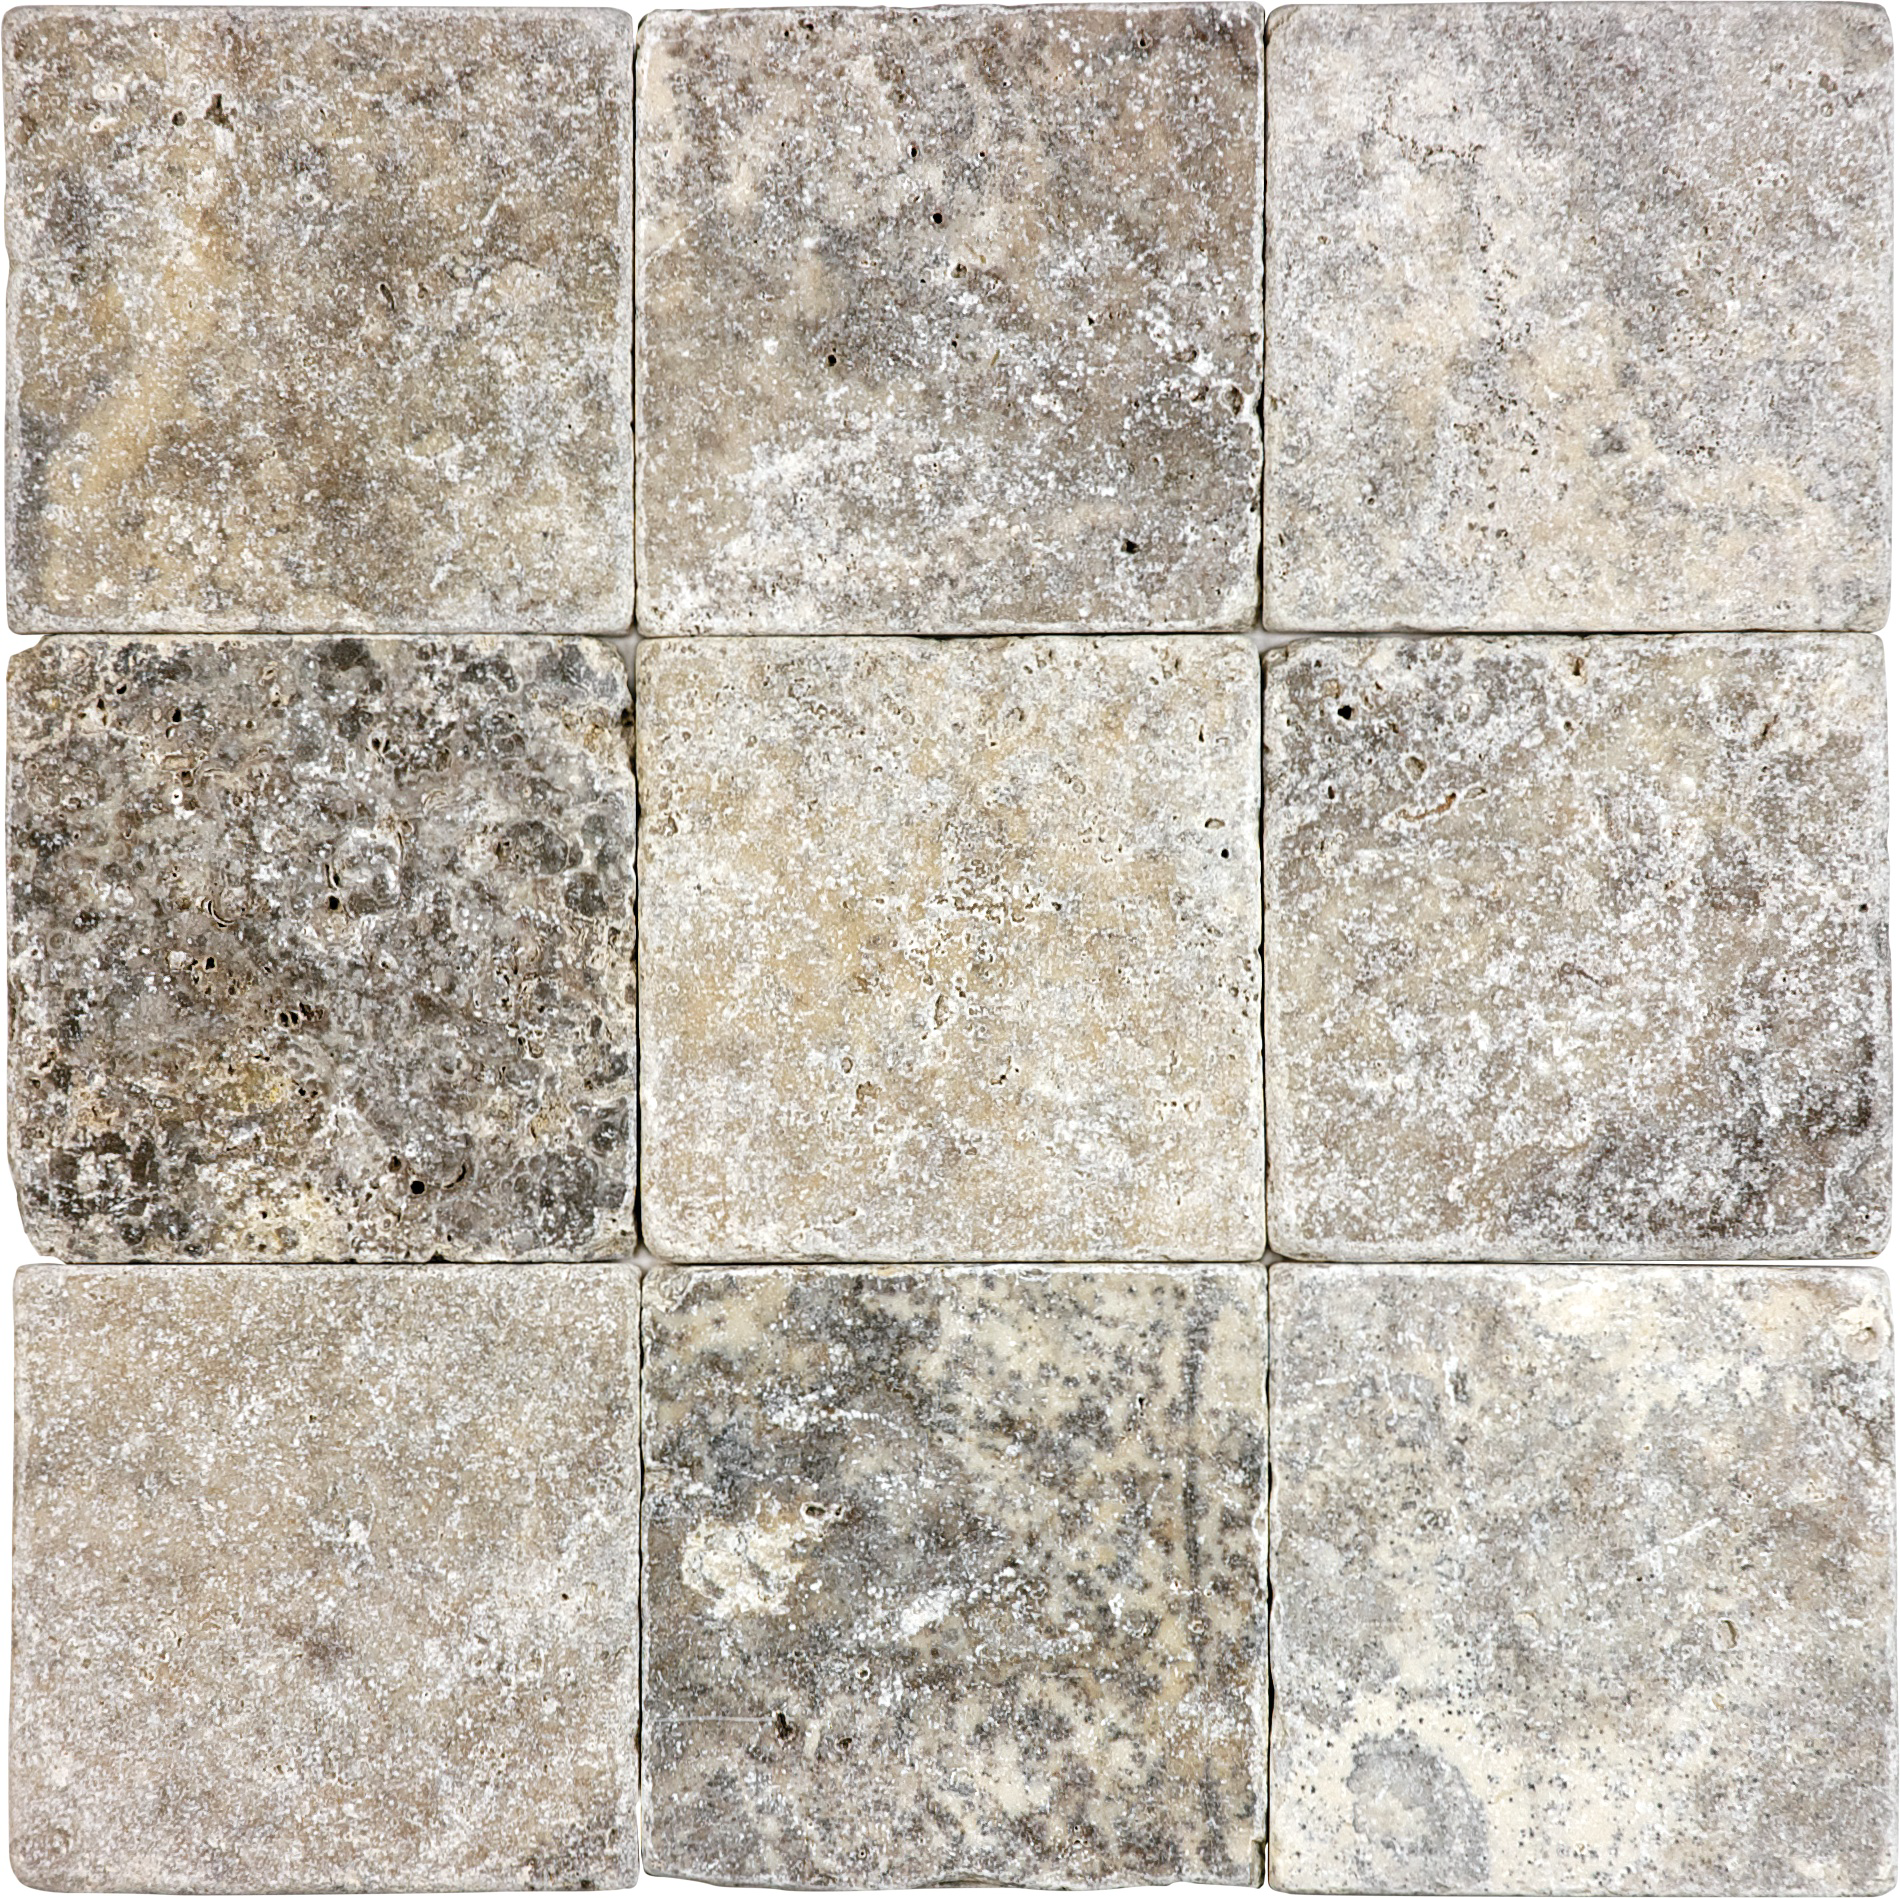 travertine pattern natural stone field tile from silver ash anatolia collection distributed by surface group international tumbled finish tumbled edge 4x4 square shape